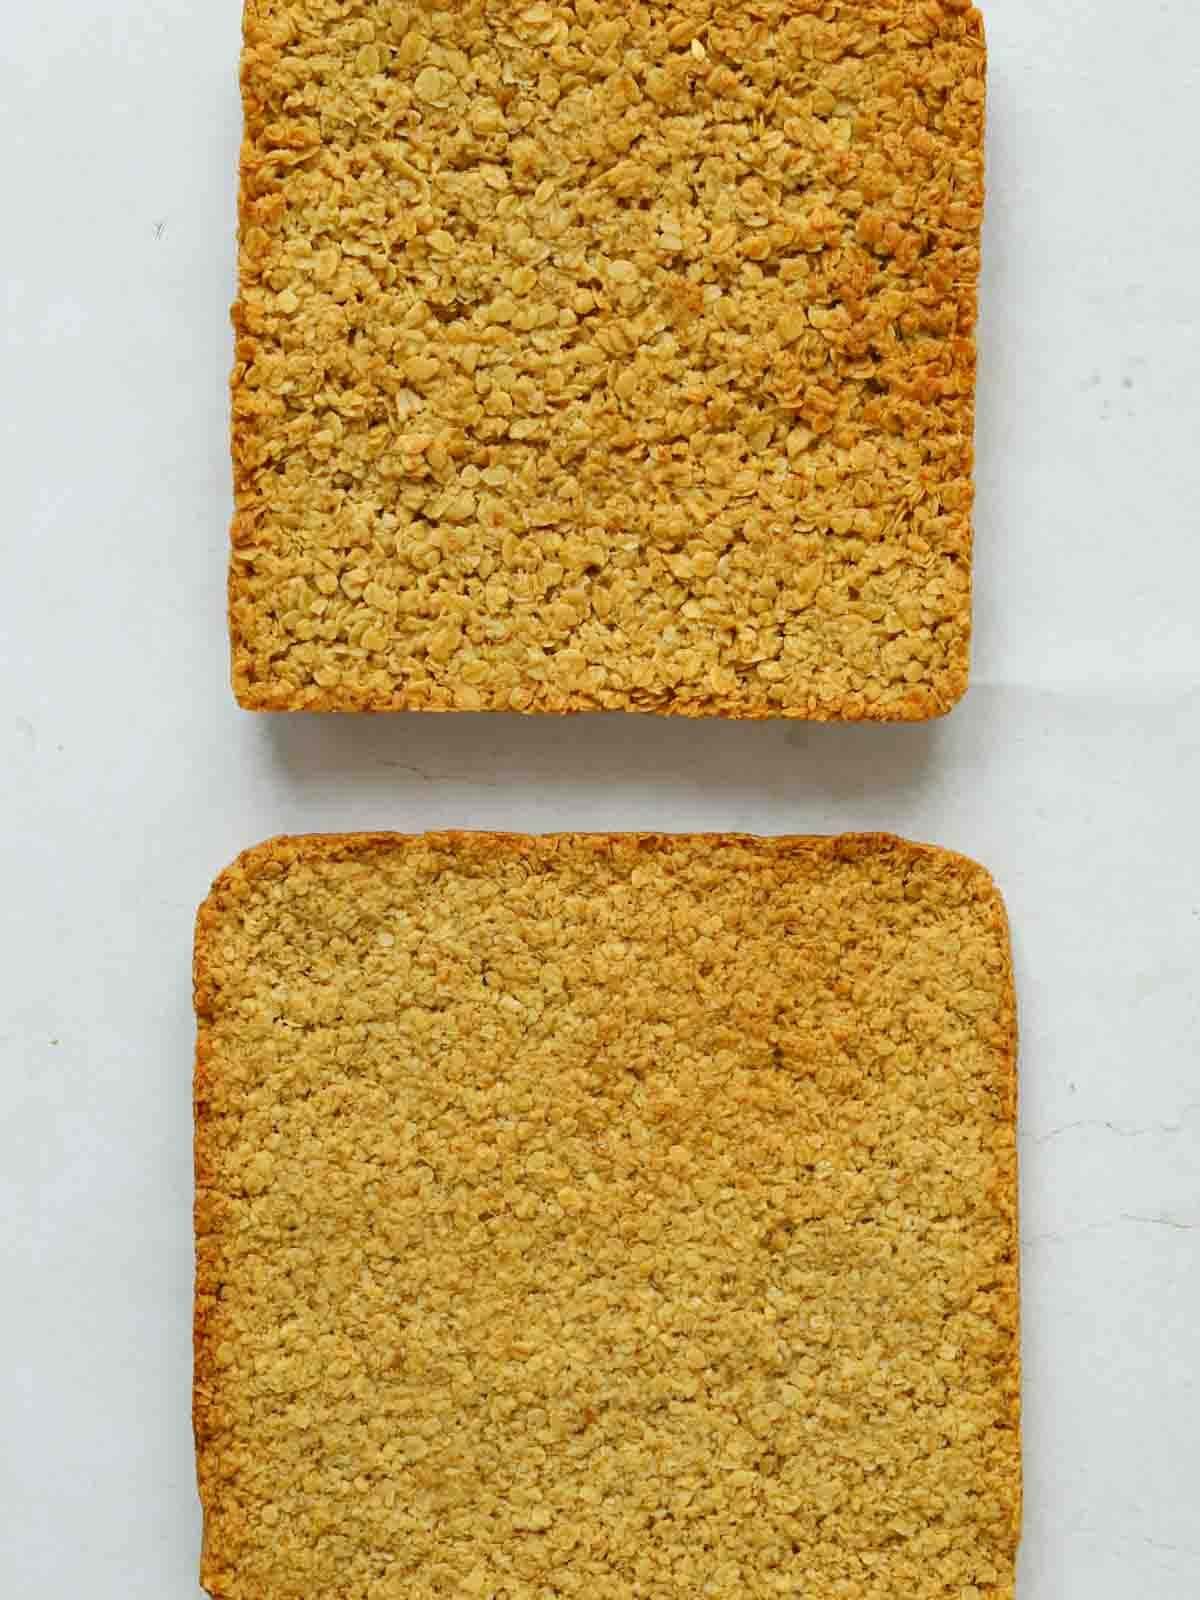 Two slabs of baked flapjack, showing the difference between using just rolled oats and using half rolled and half jumbo oats.